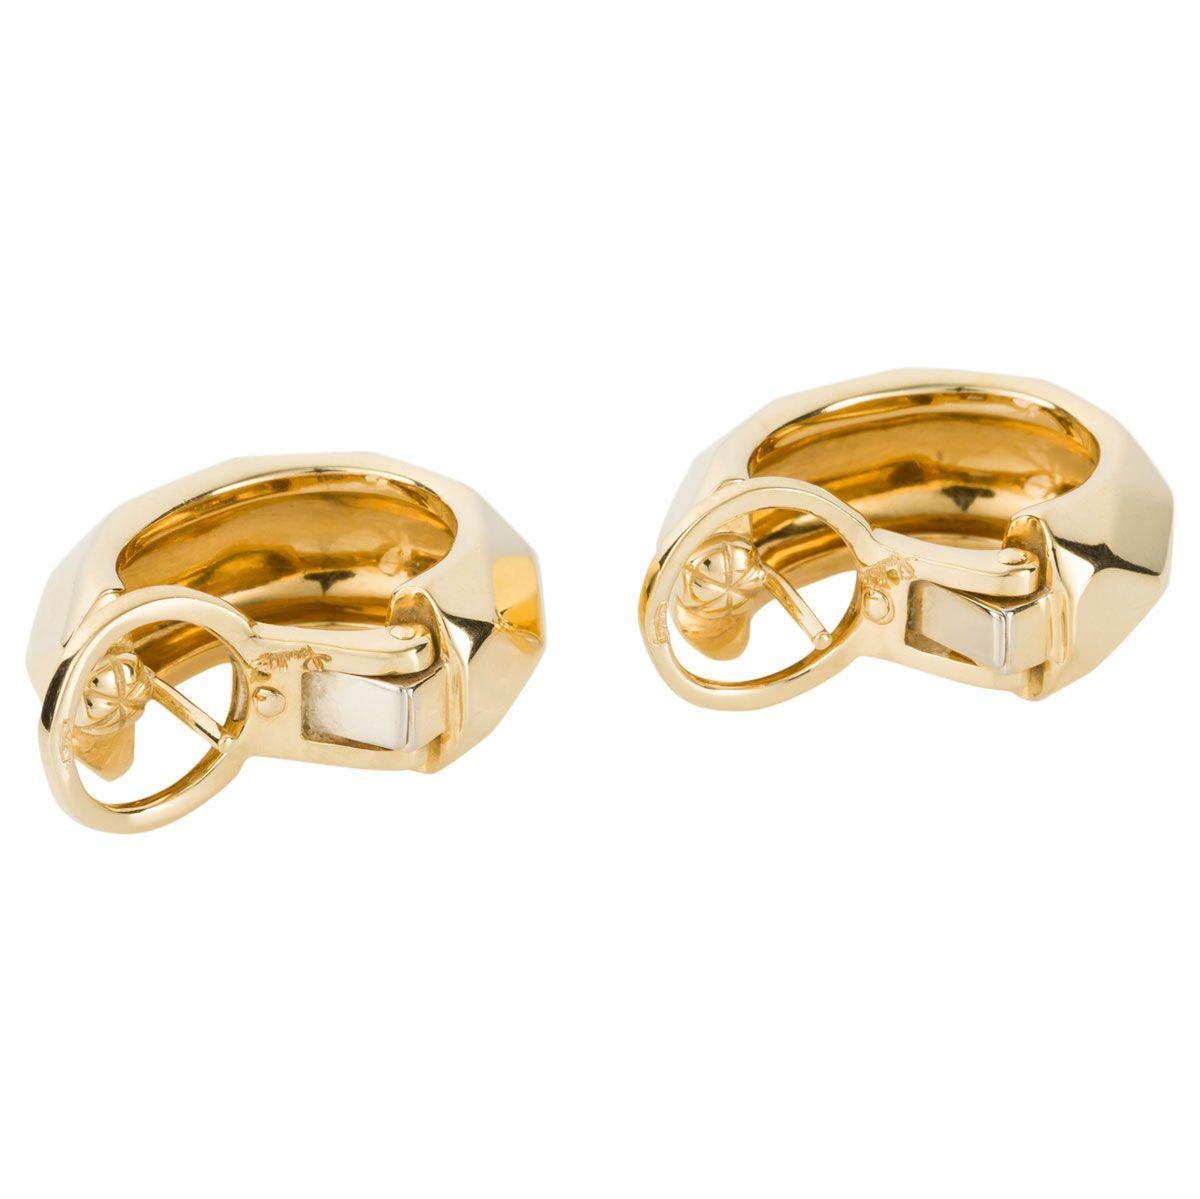 Contemporary Pomellato 18 Karat Faceted Yellow Gold Earring Hoops